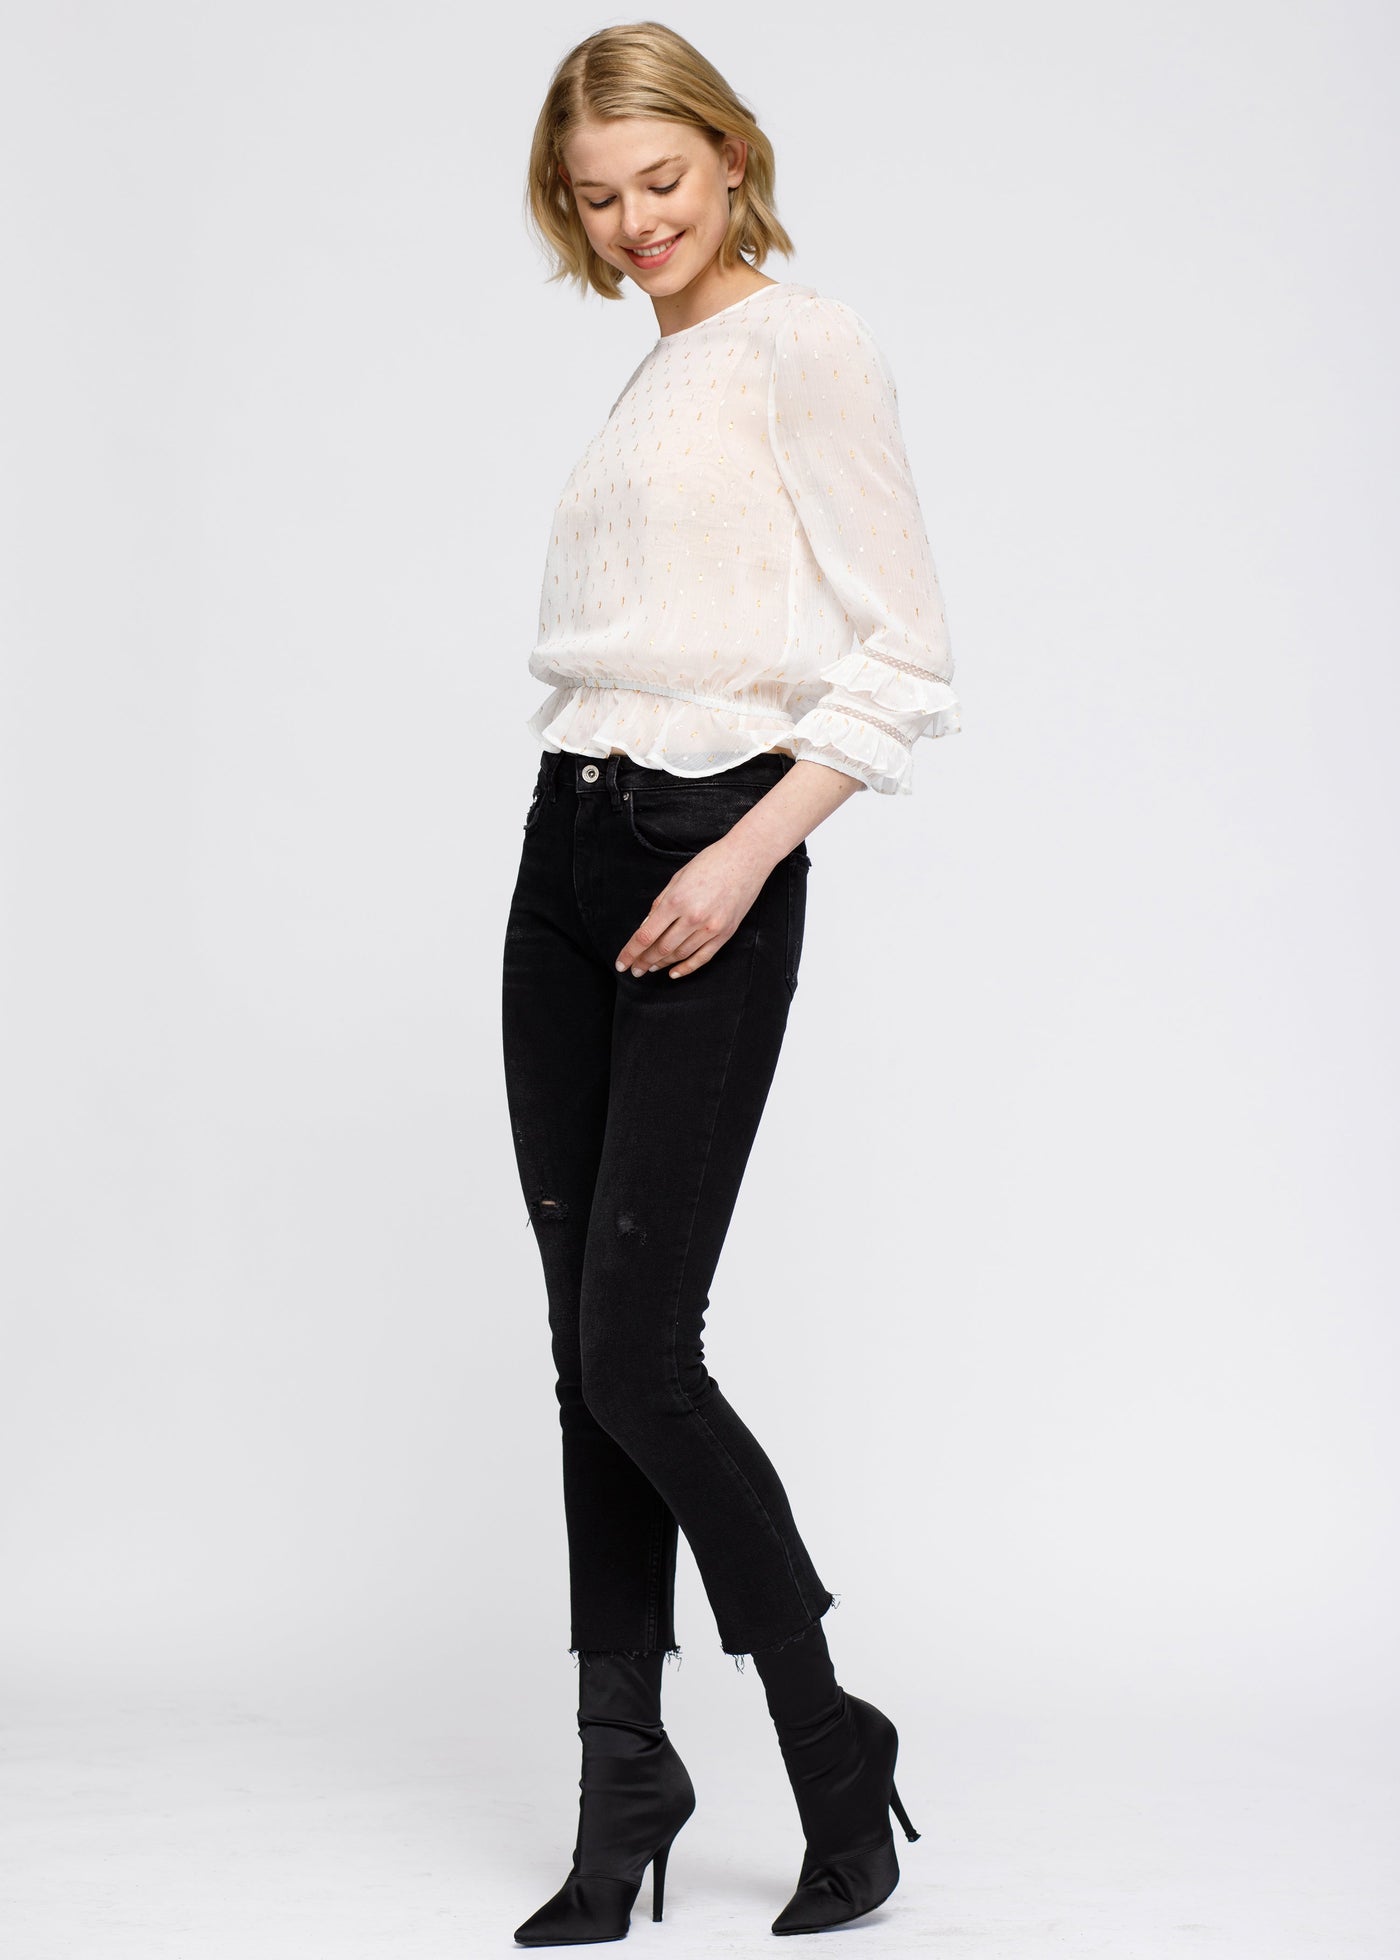 Lace Inset Ruffle Blouse In White by Shop at Konus